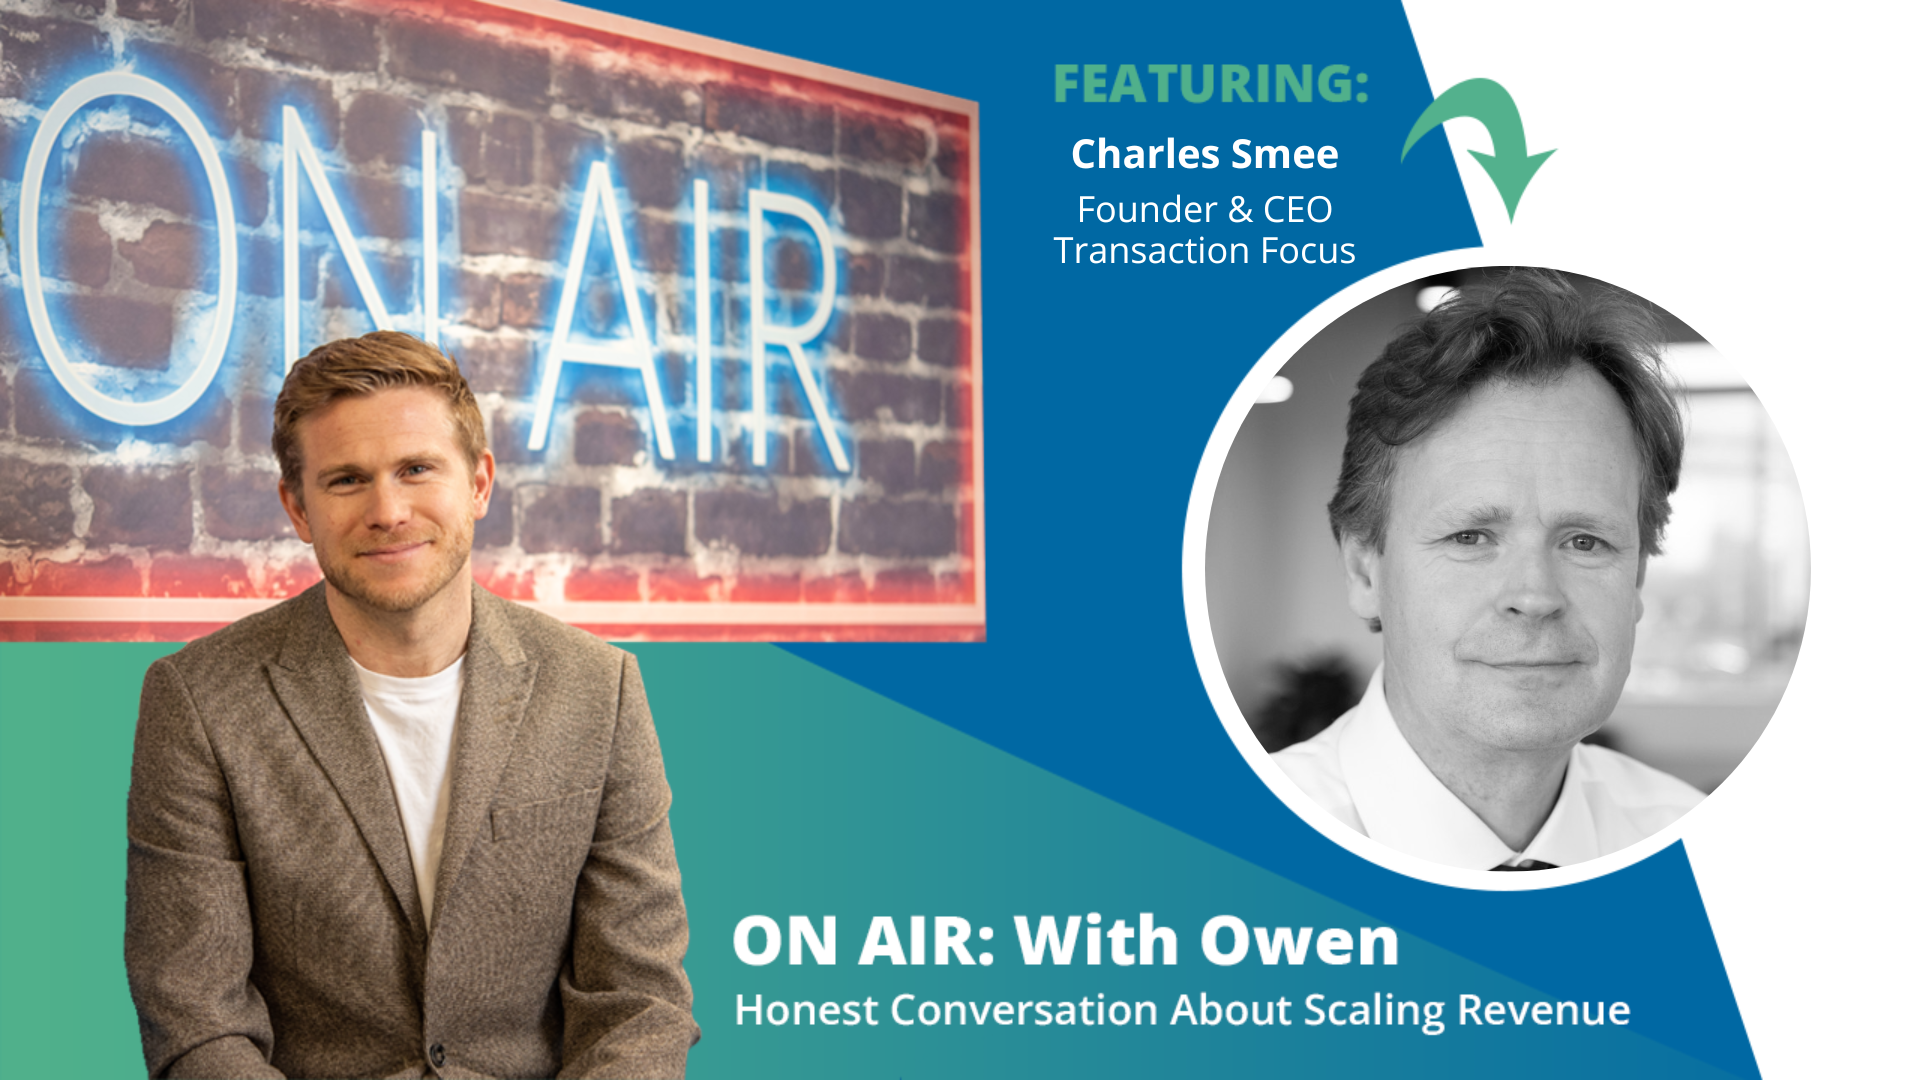 ON AIR: With Owen Episode 64 Featuring Charles Smee – Founder & CEO of Transaction Focus